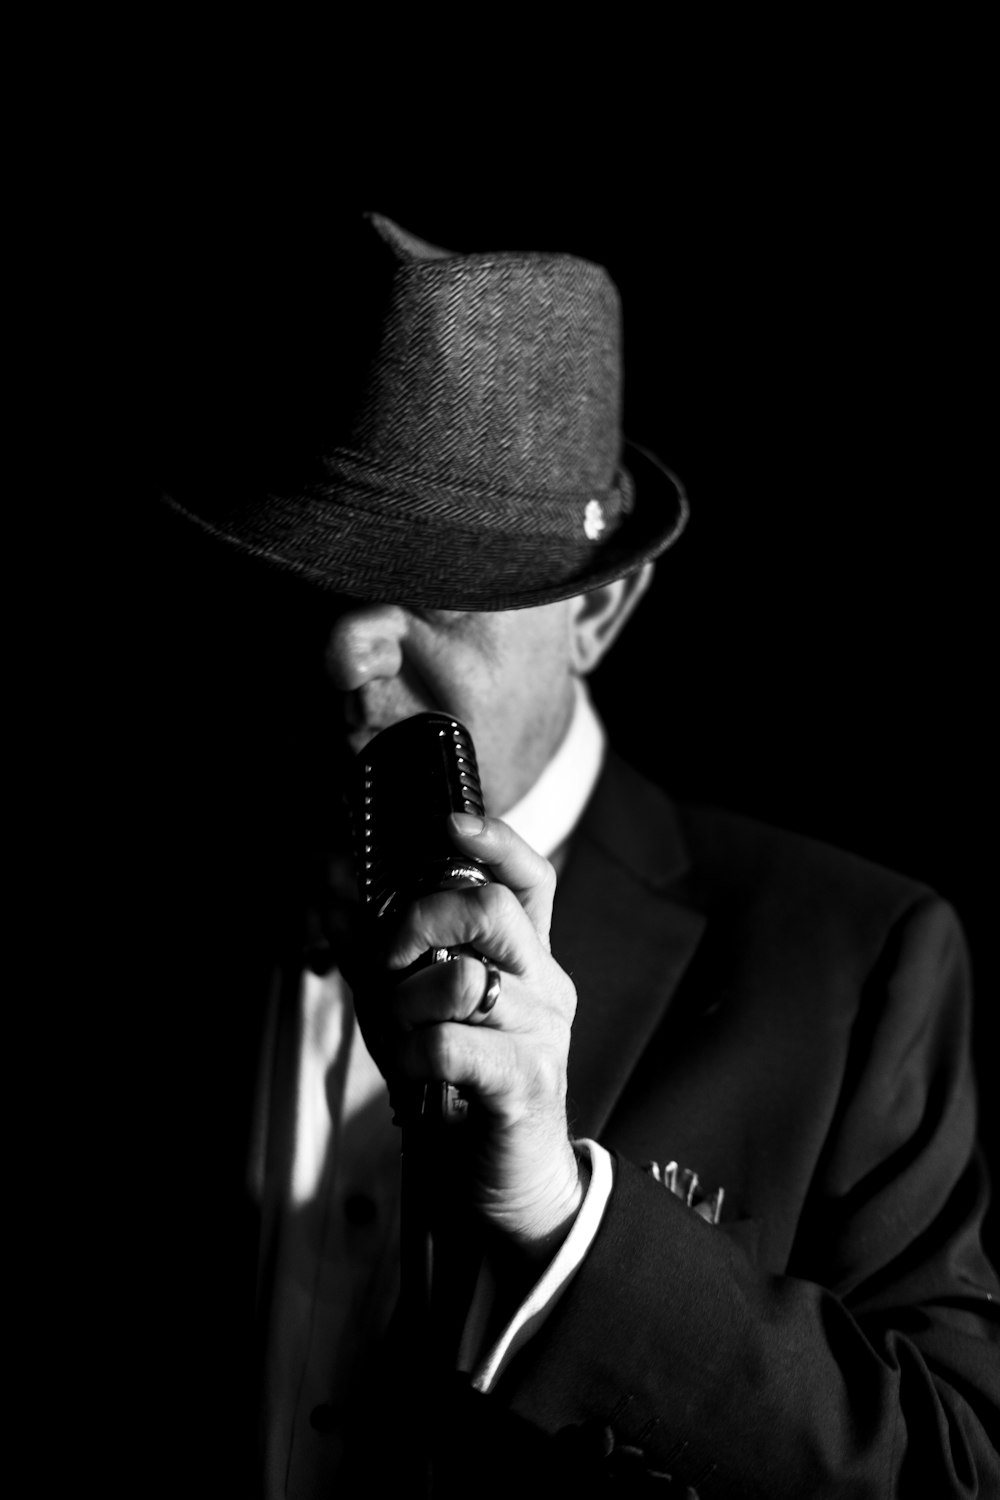 a man in a suit and hat holding a cell phone